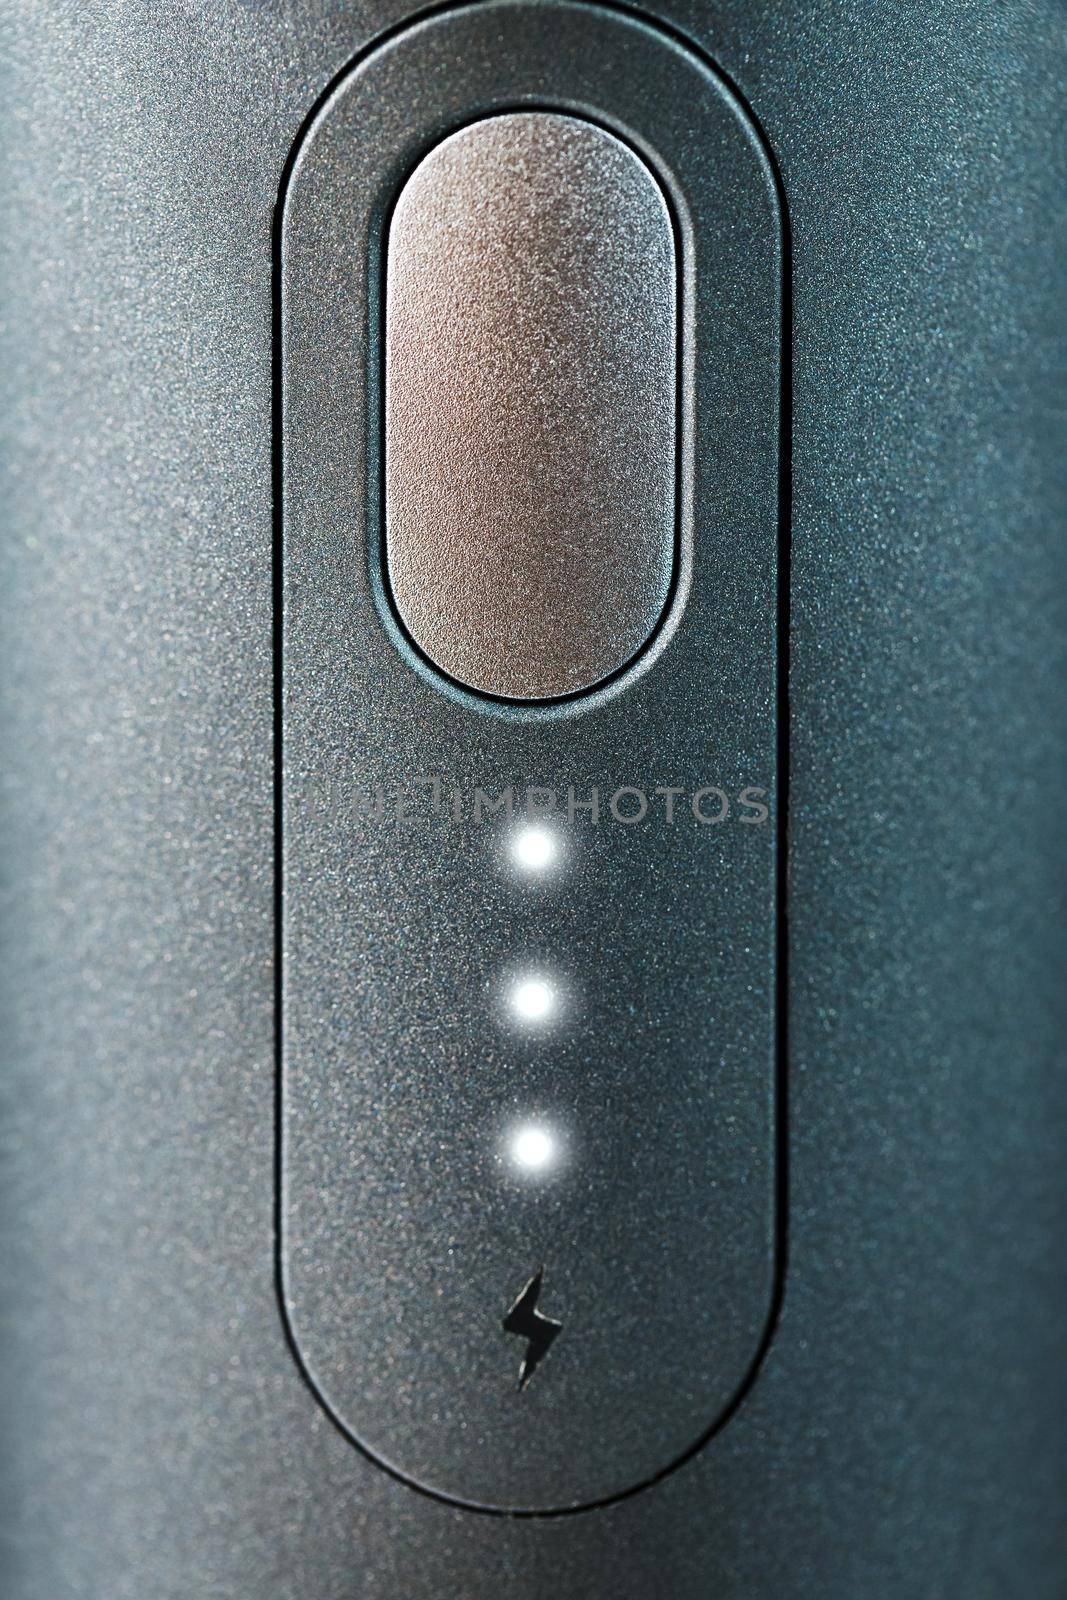 Button with led charging indication close-up. Control panel of the device.